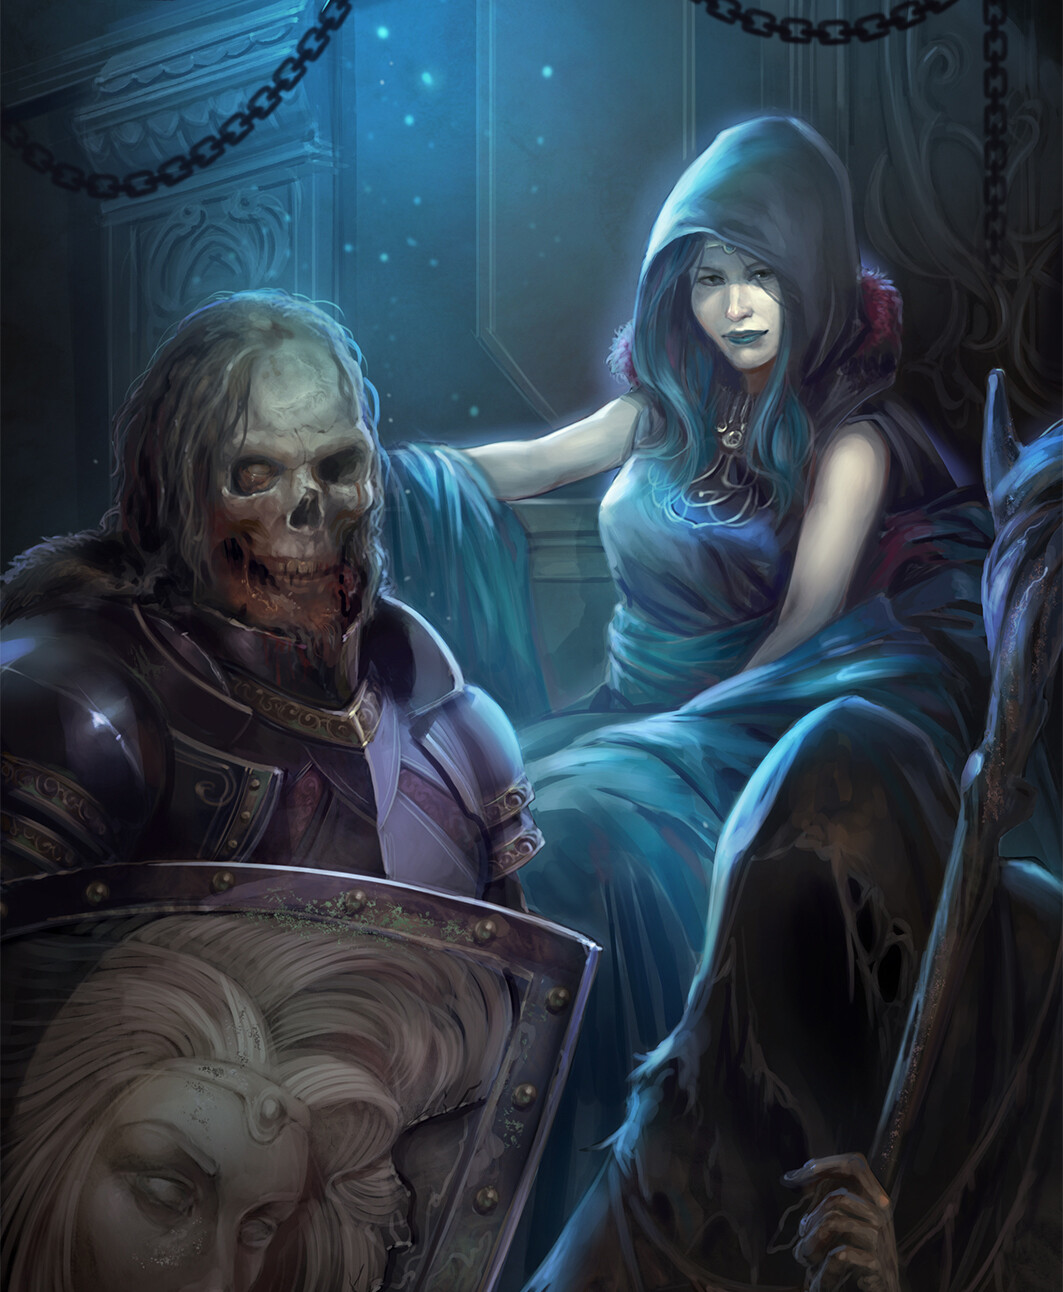 Dark Lady and Sons (detail)
Shadow of the Demon Lord _Schwalb Entertainment, LLC 